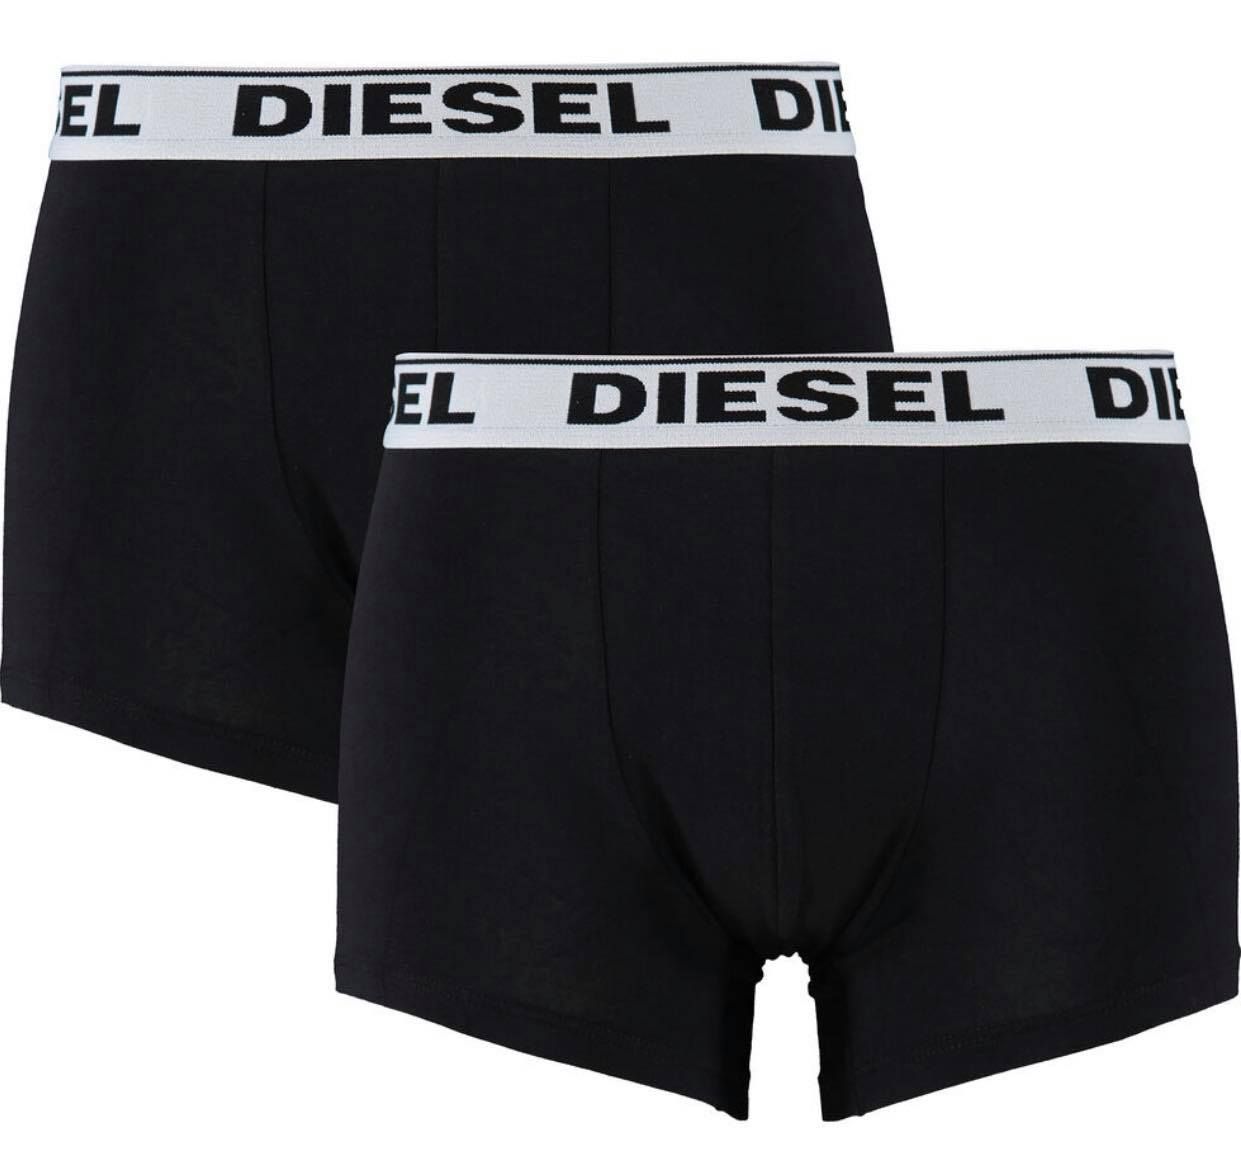 Diesel UMBX-KORY E1350 Boxer Shorts Two Pack. Diesel Mens Boxer Shorts 2 Pack. 95% Cotton 5% Elastane. Stretching Fit. Diesel Branding on Waistband. Style - UMBX-KORYTWOPACK RQARZ E1350